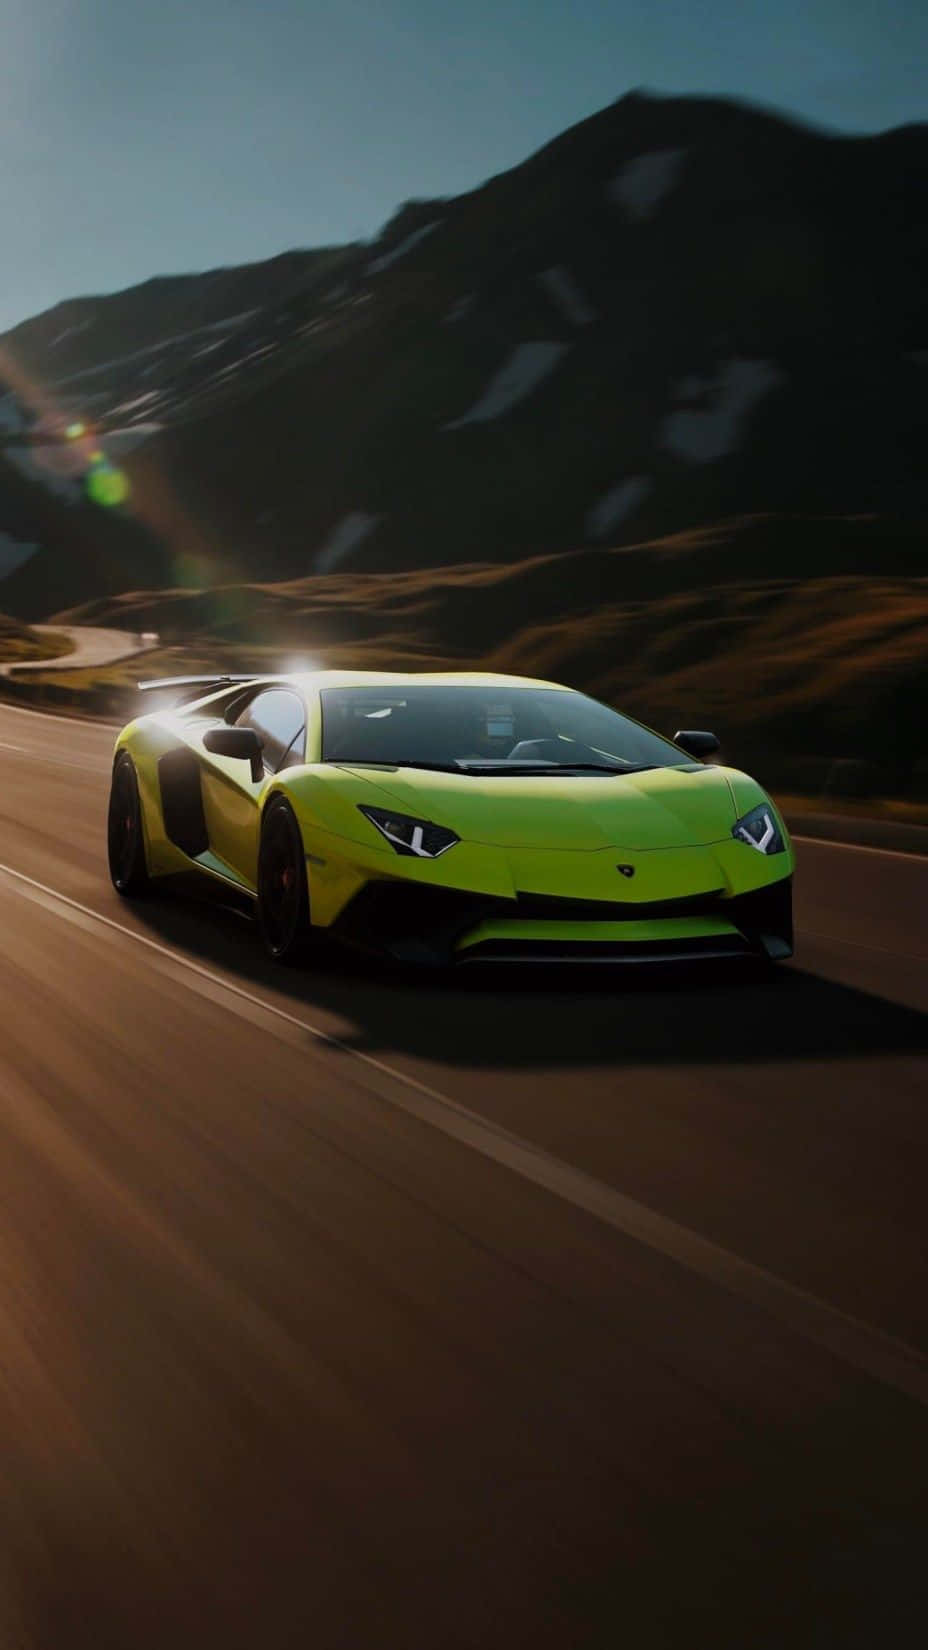 Get Ahead in Style with the Lamborghini Phone Wallpaper